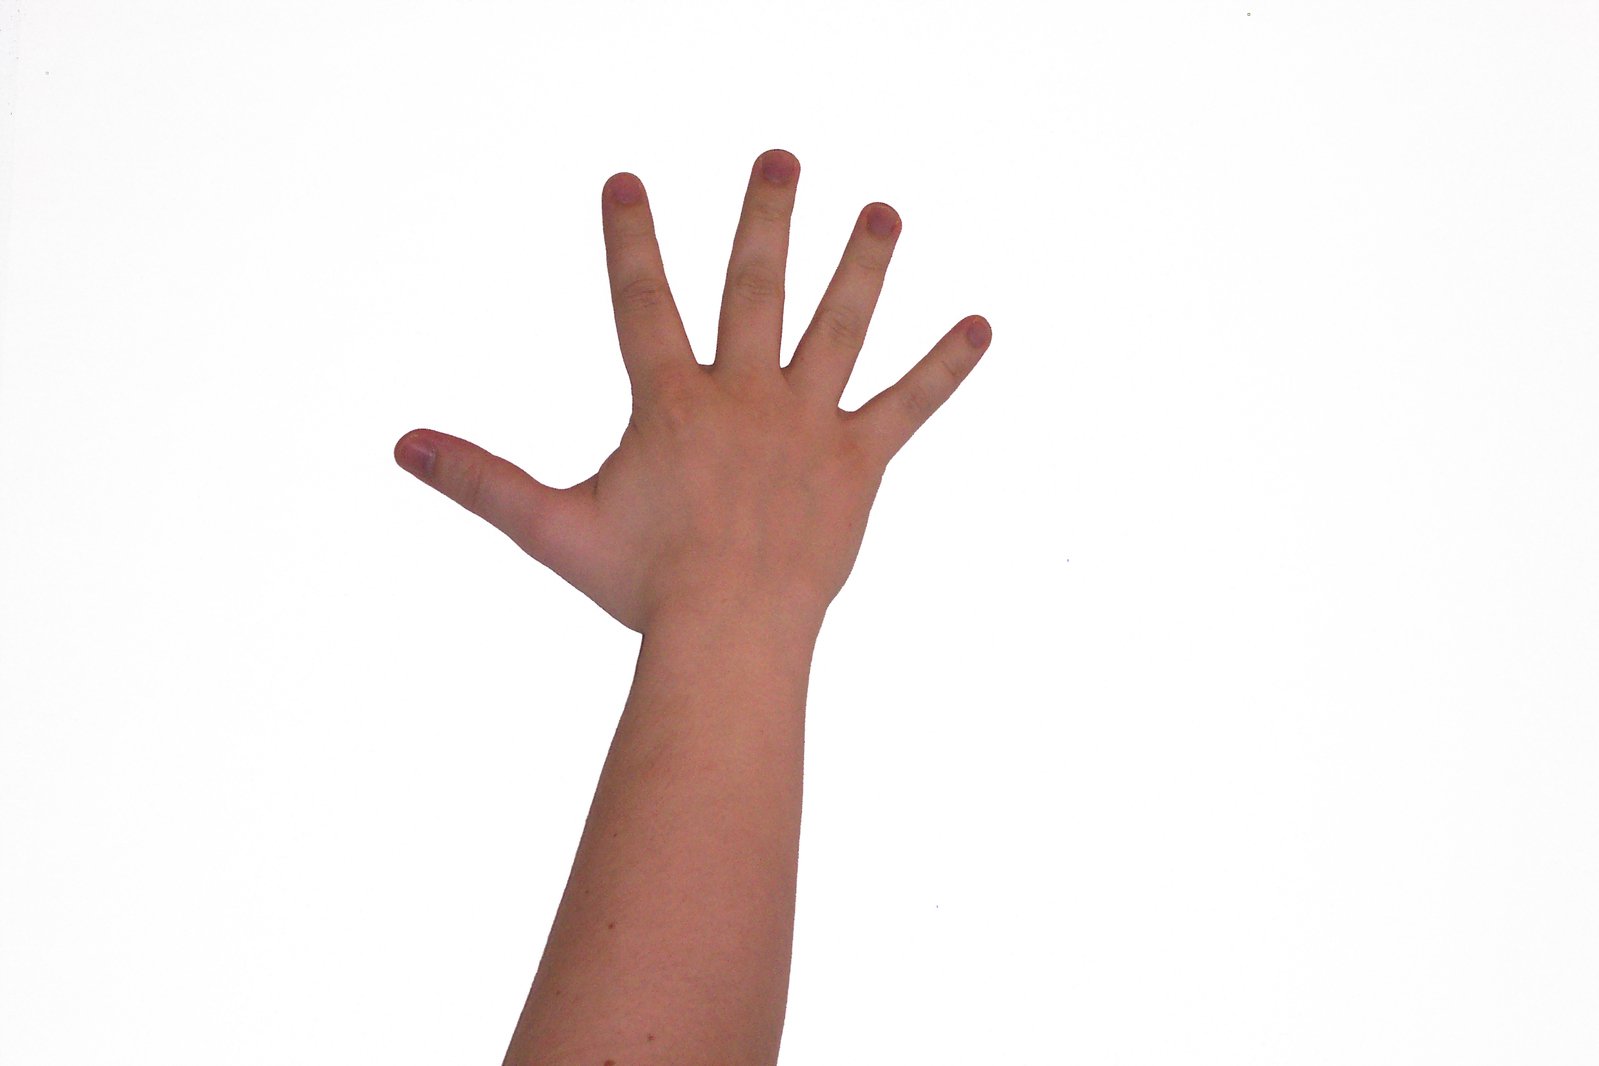 a person's hand reaches for soing white background